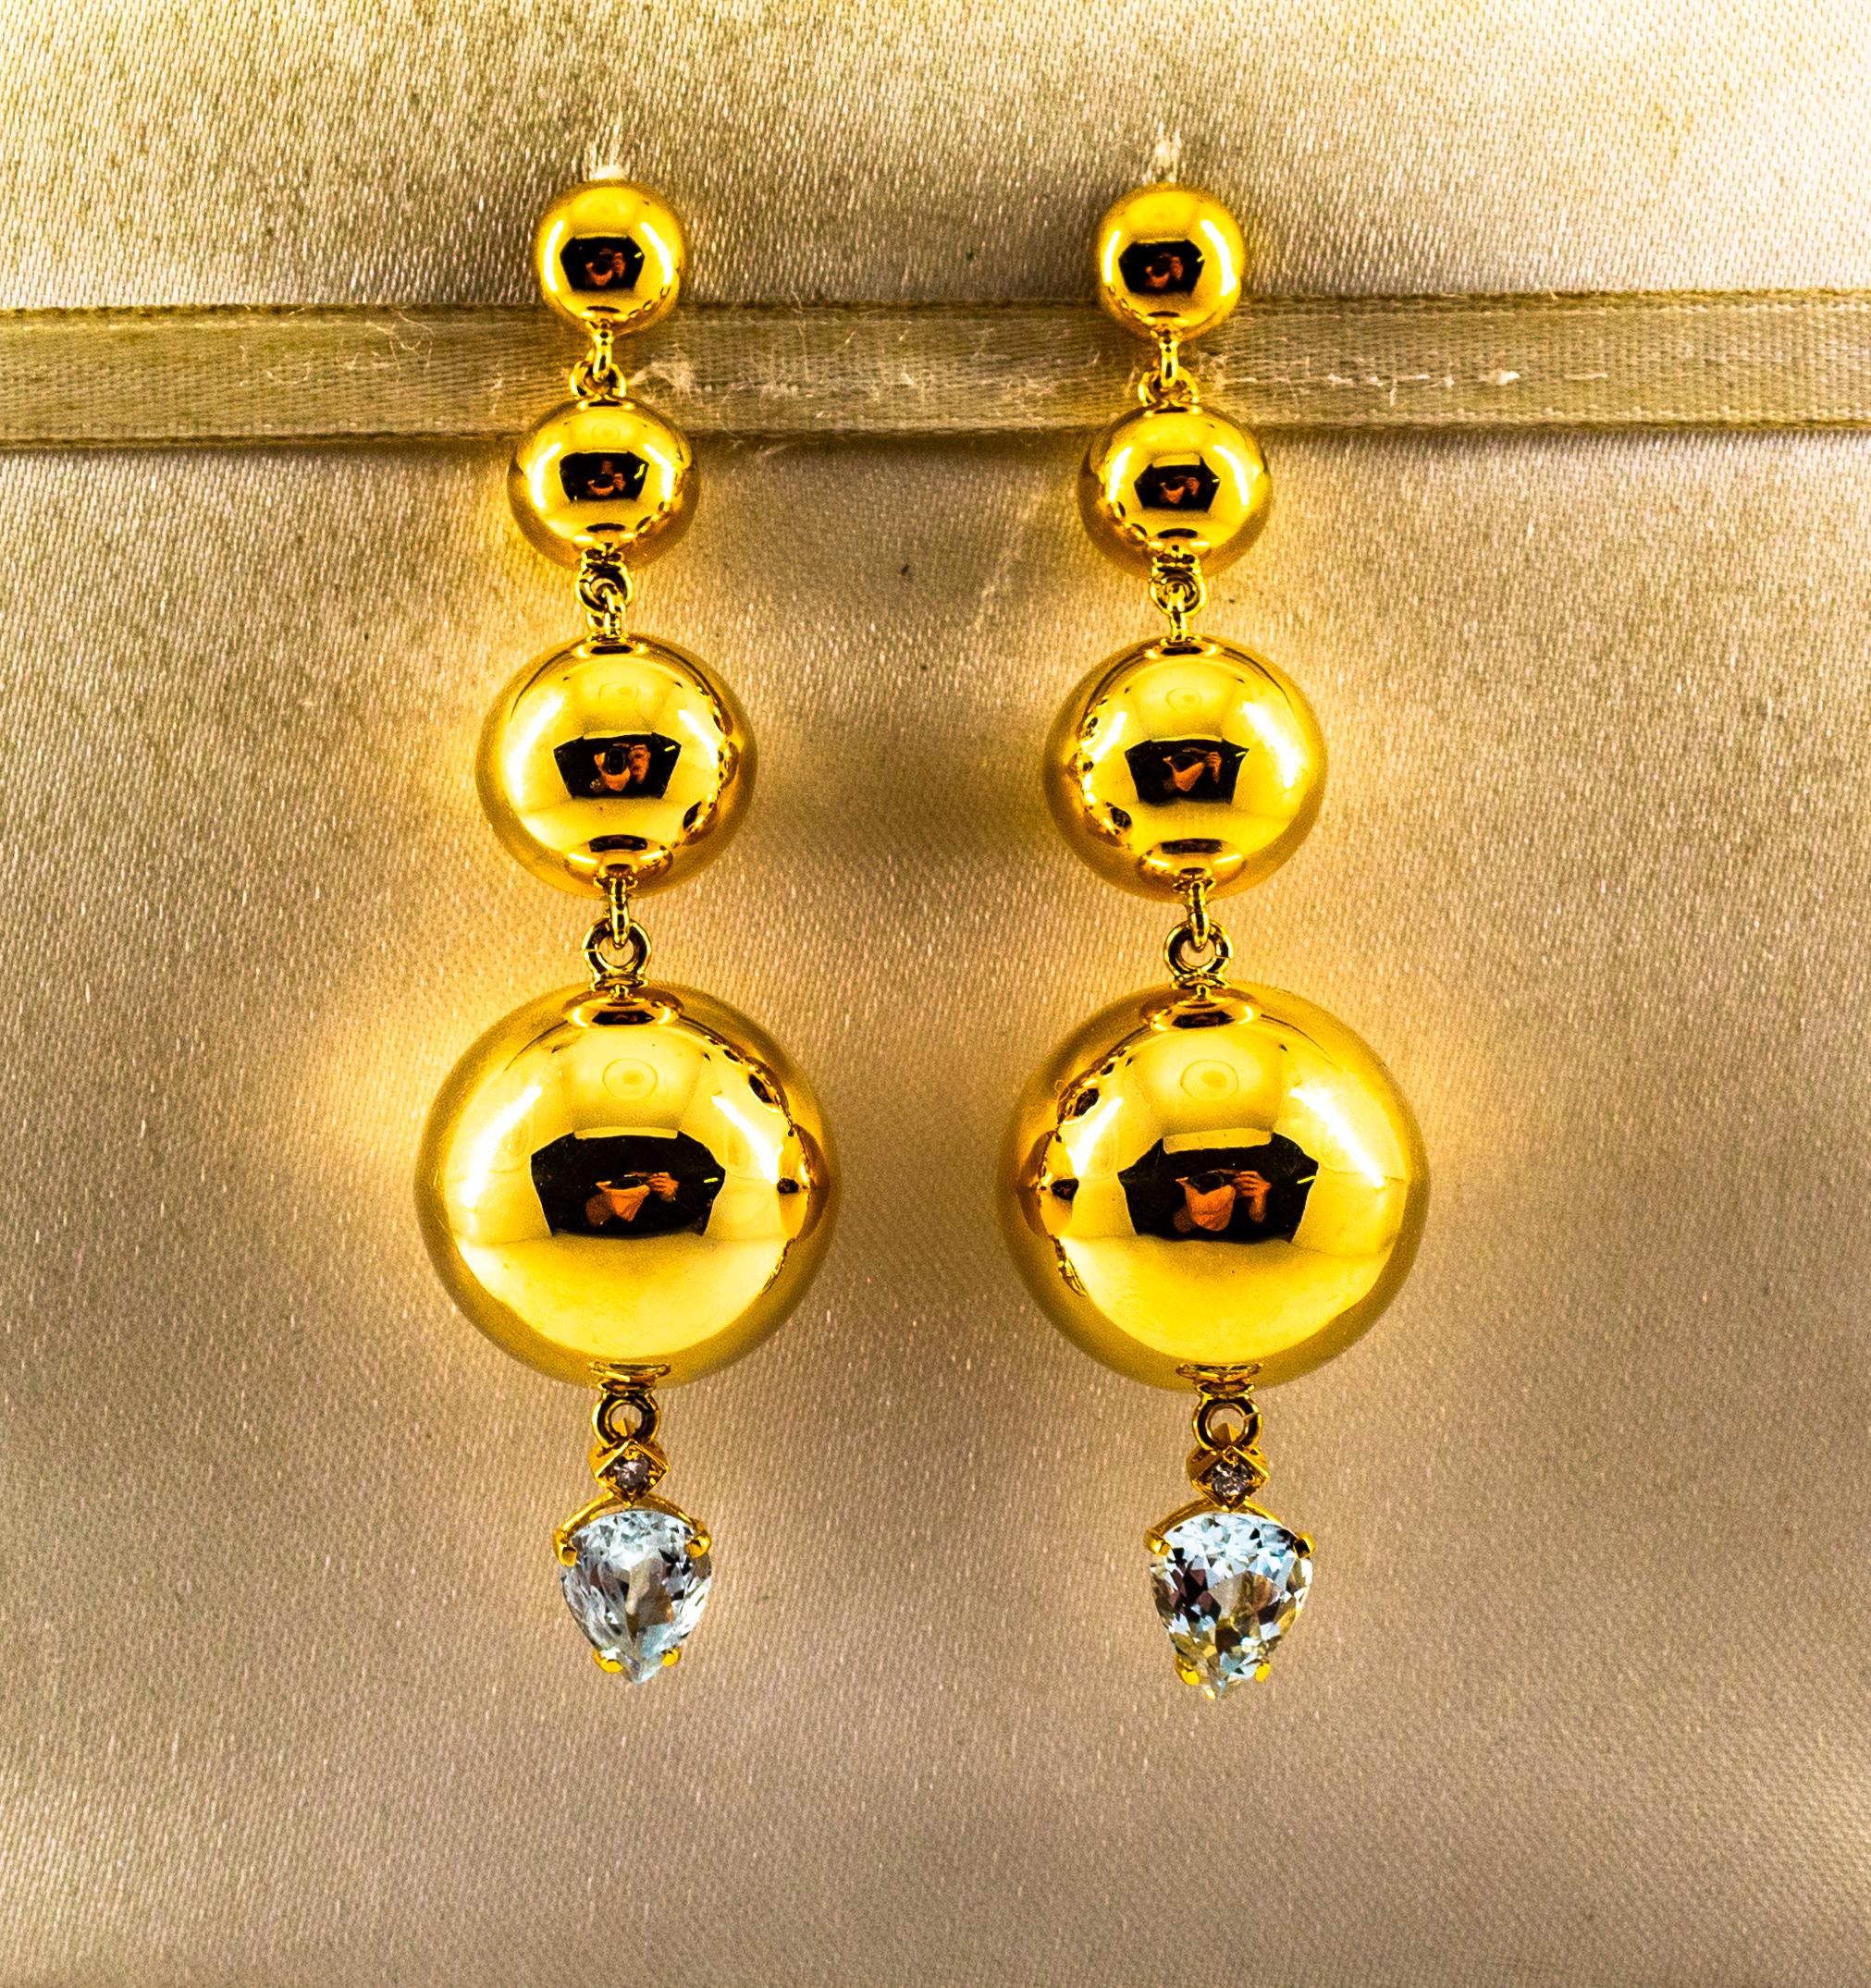 For any problems related to some materials contained in the items that do not allow shipping, please contact the seller with a private message to solve the problem.
We can ship every piece of our 1stdibs catalog worldwide.

These Earrings are made